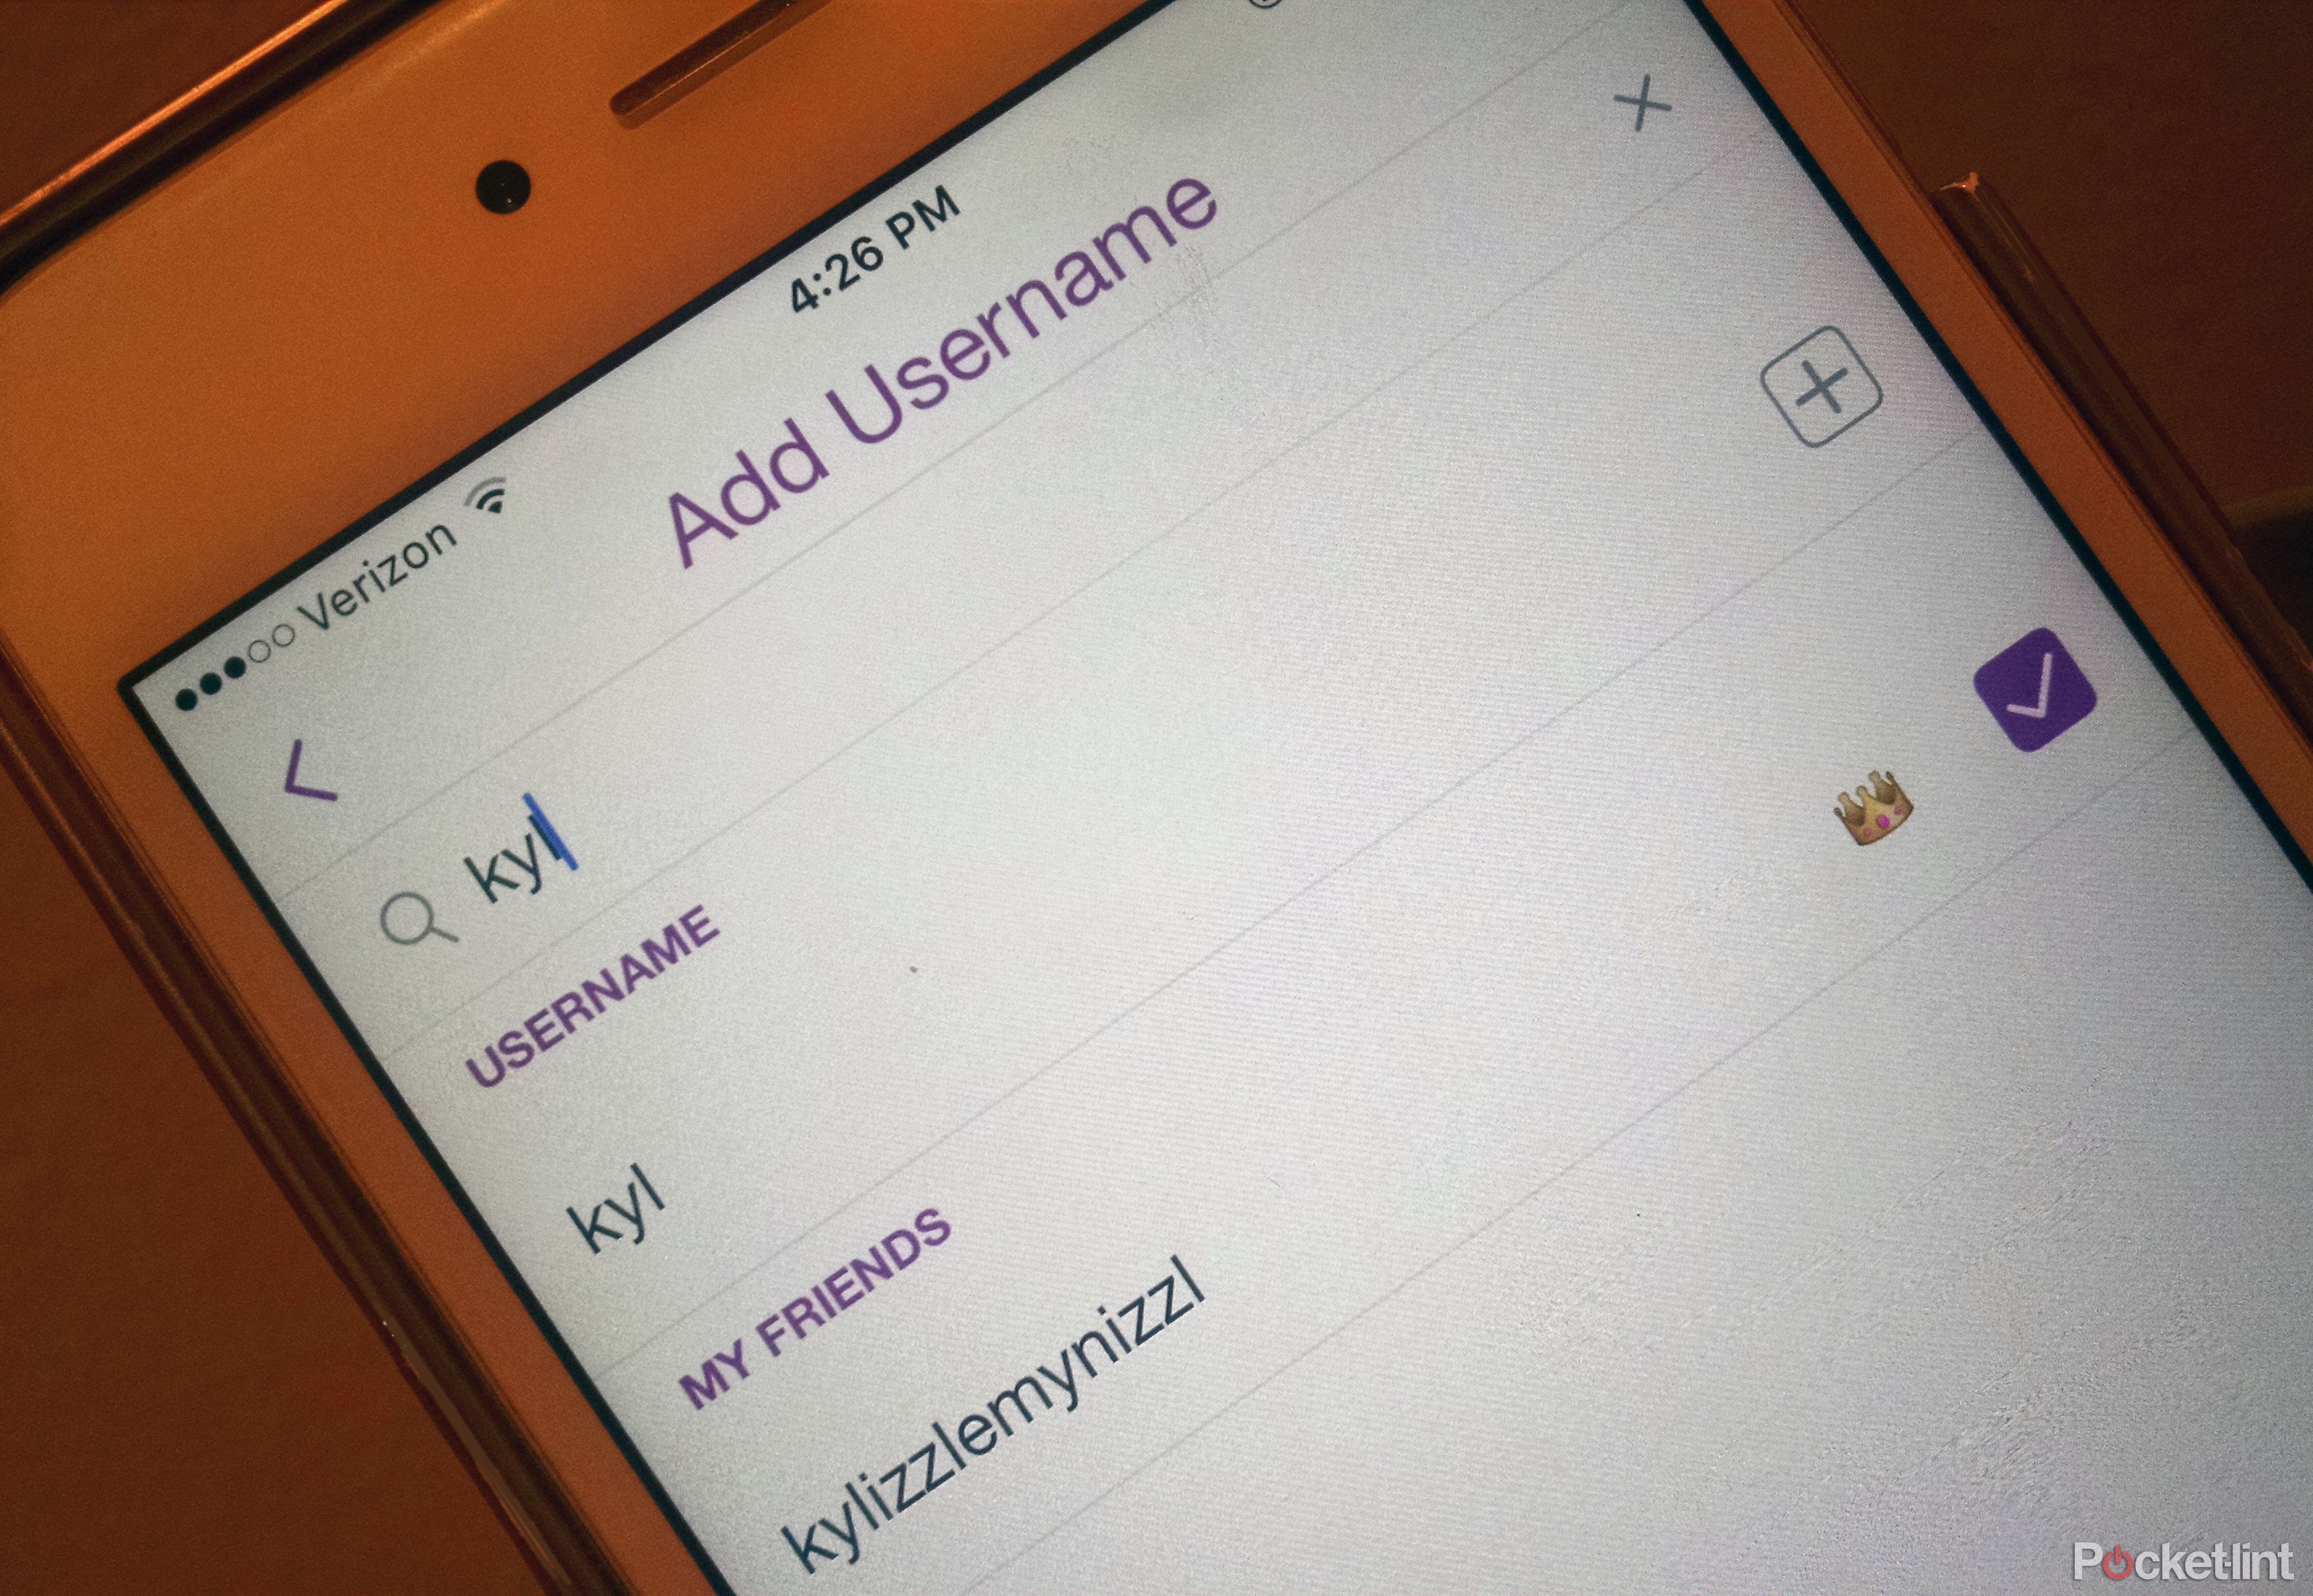 snapchat finally verifies accounts here’s how to find official stories  image 1